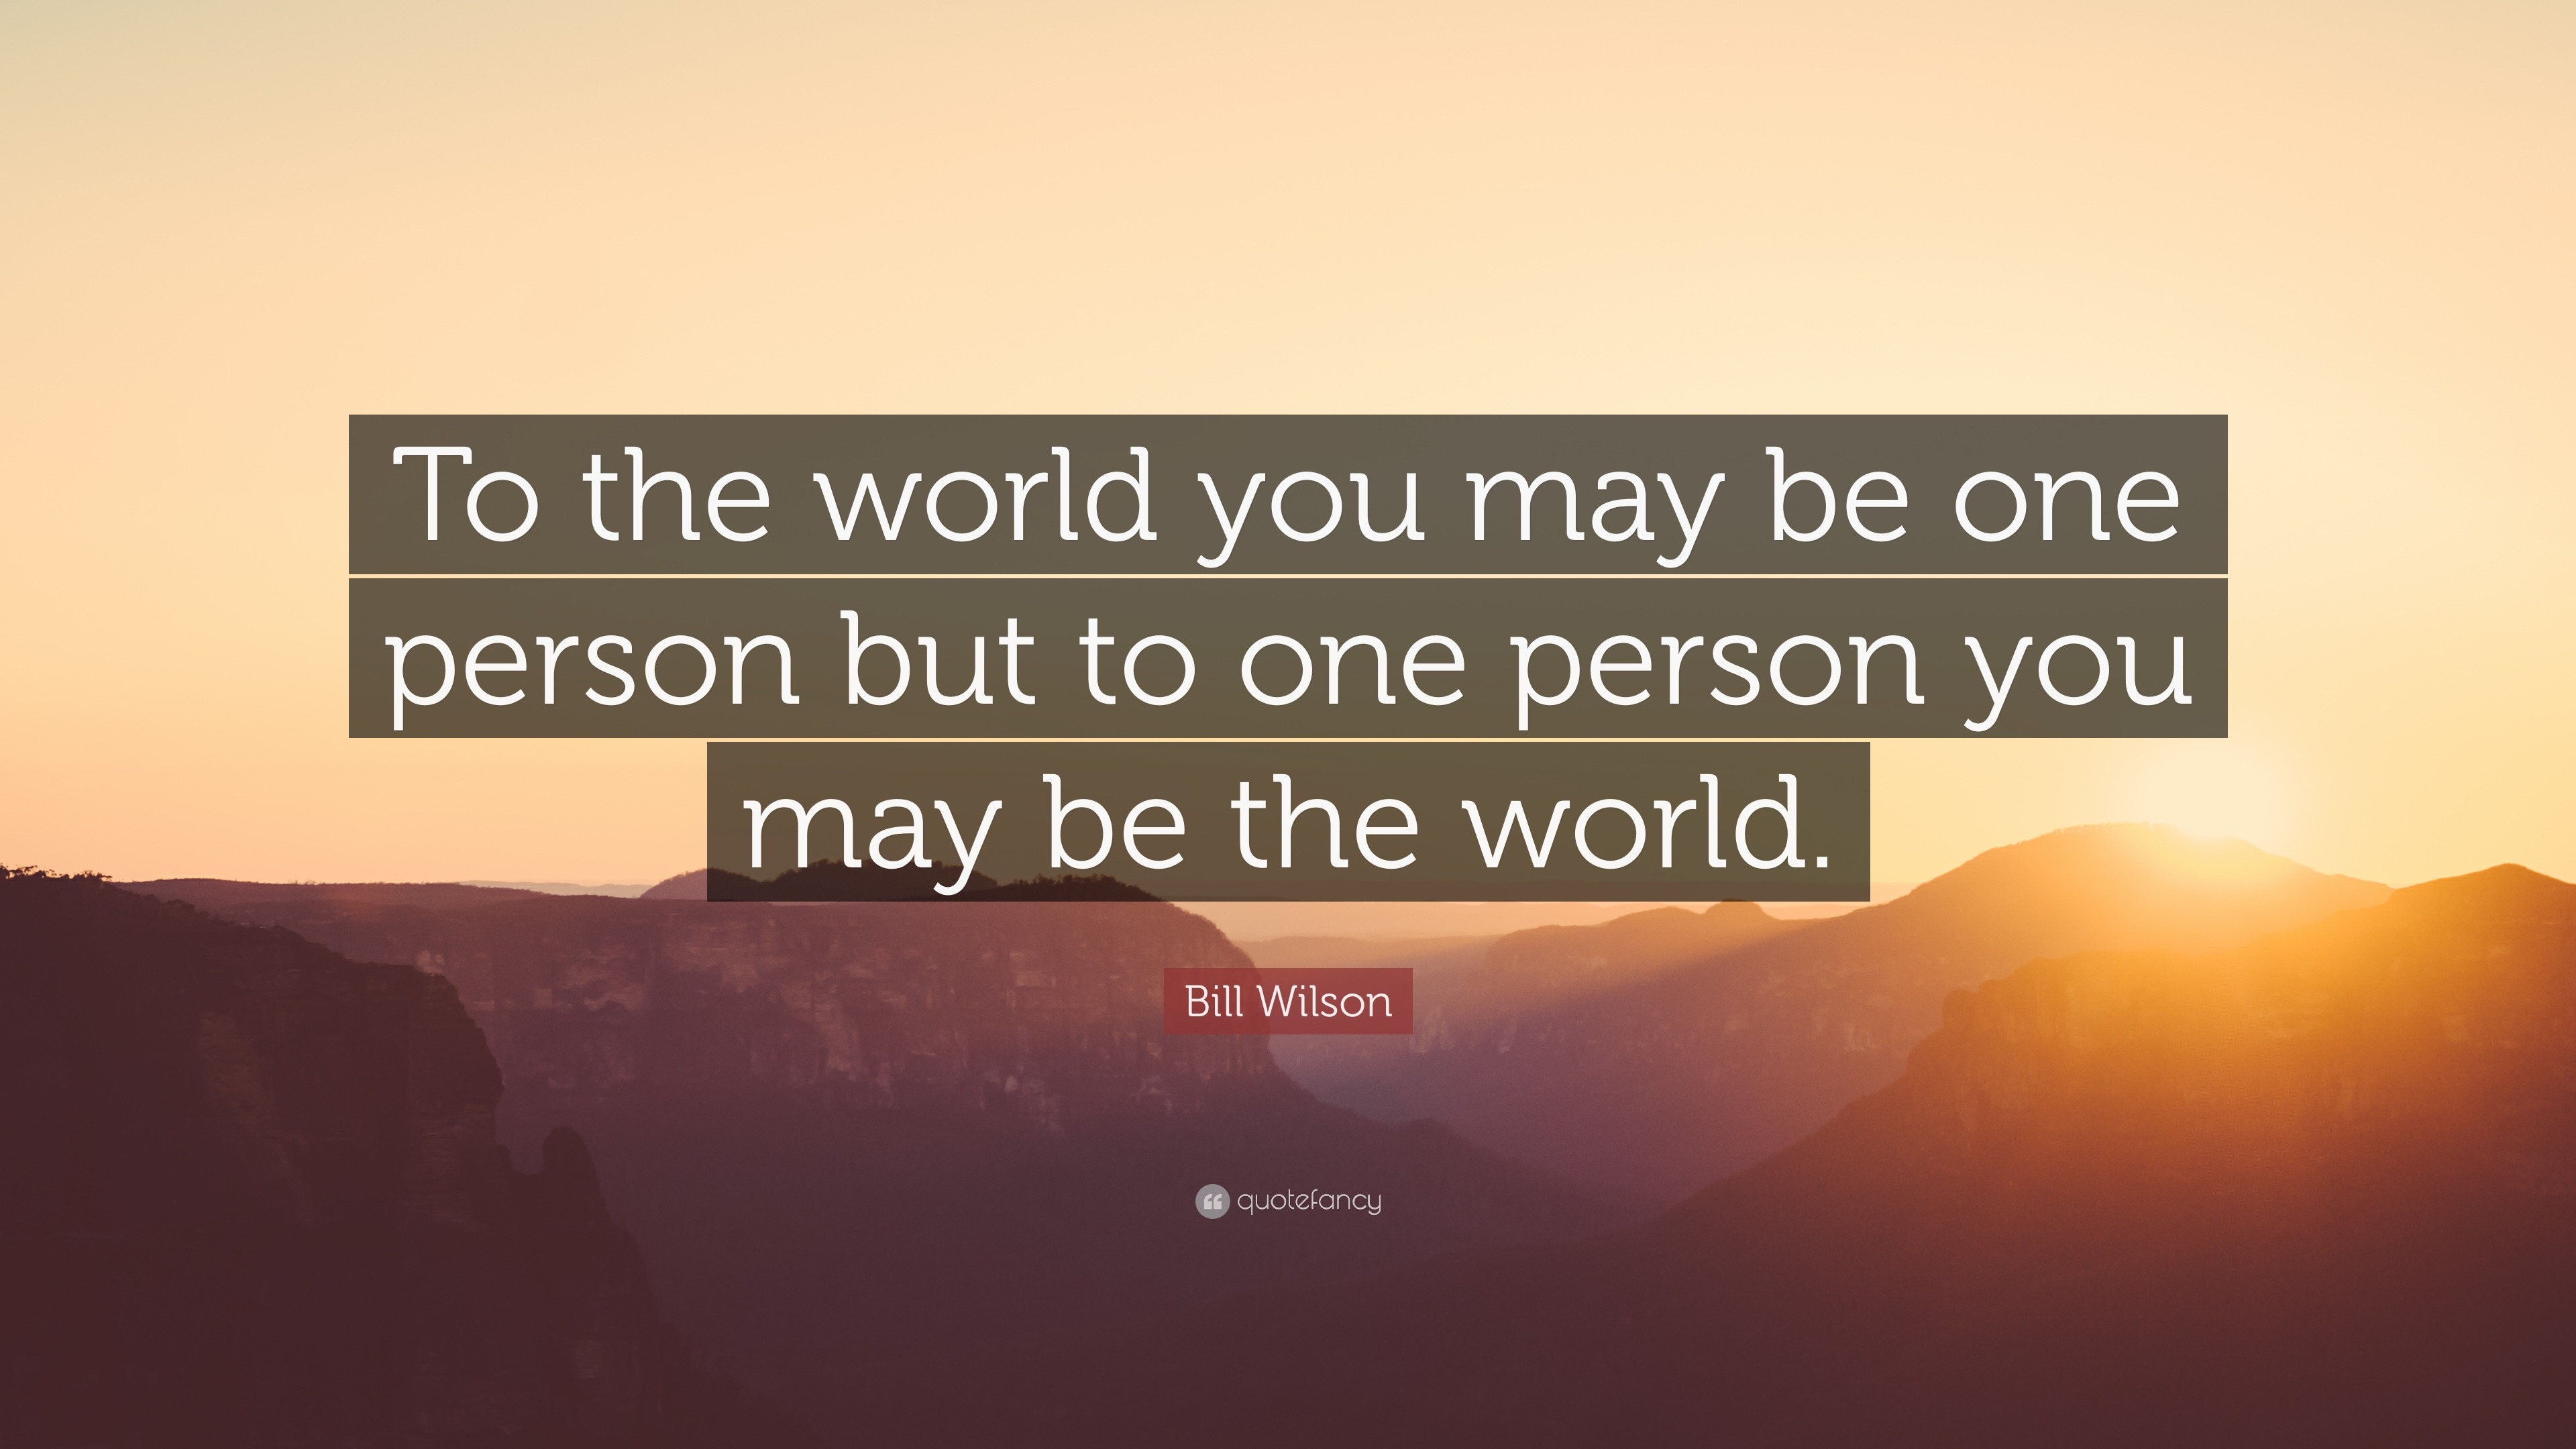 Bill Wilson Quote: “To the world you may be one person but to one